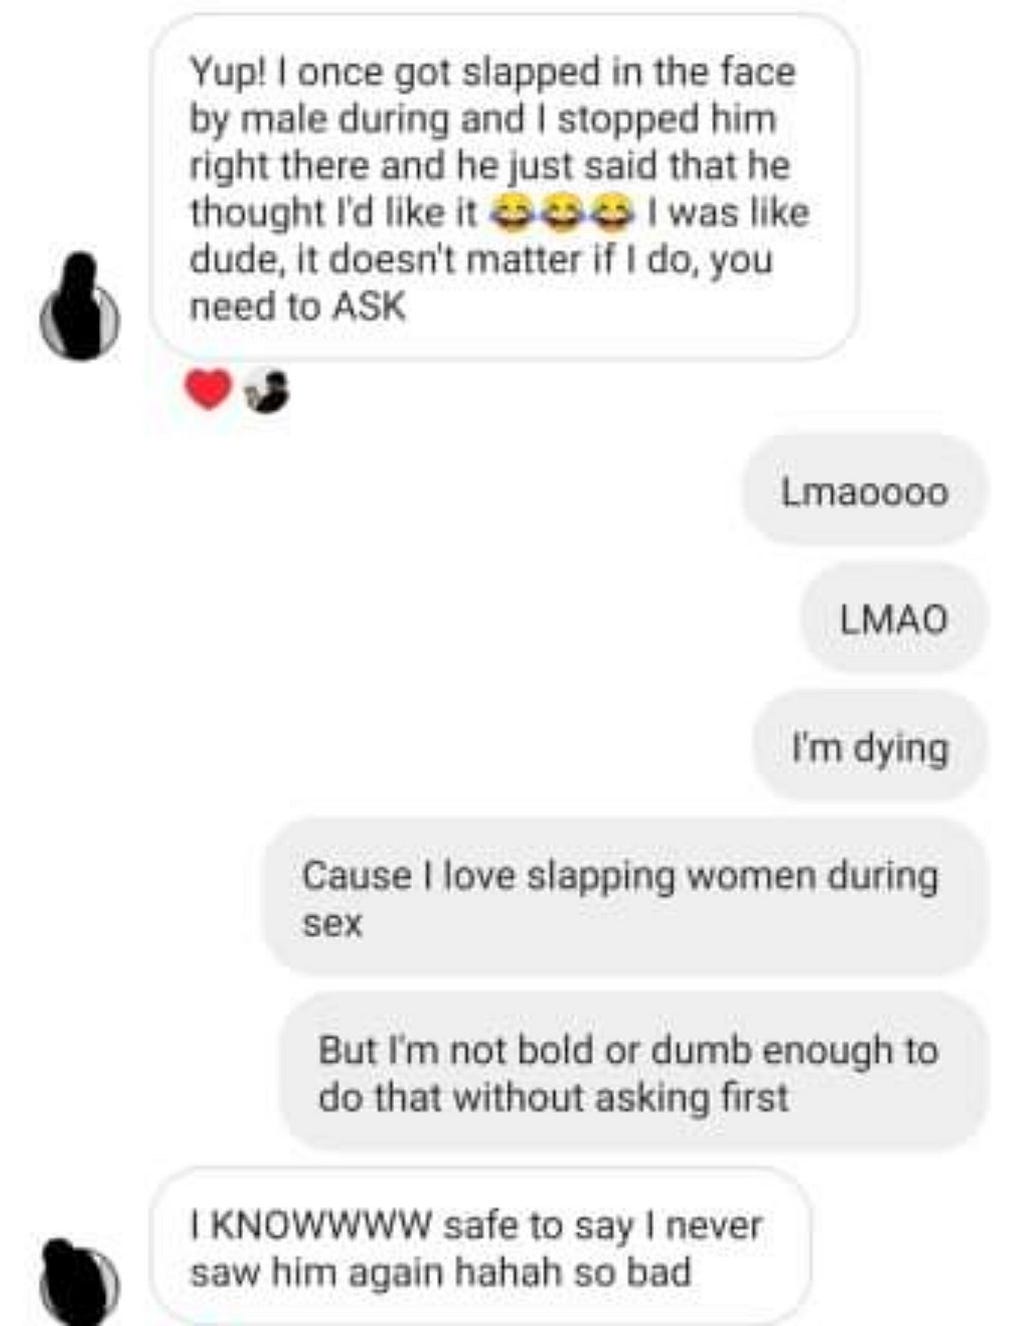 A screenshot from IG of a woman telling me about when a man slapped her face during sex without first asking for permission.